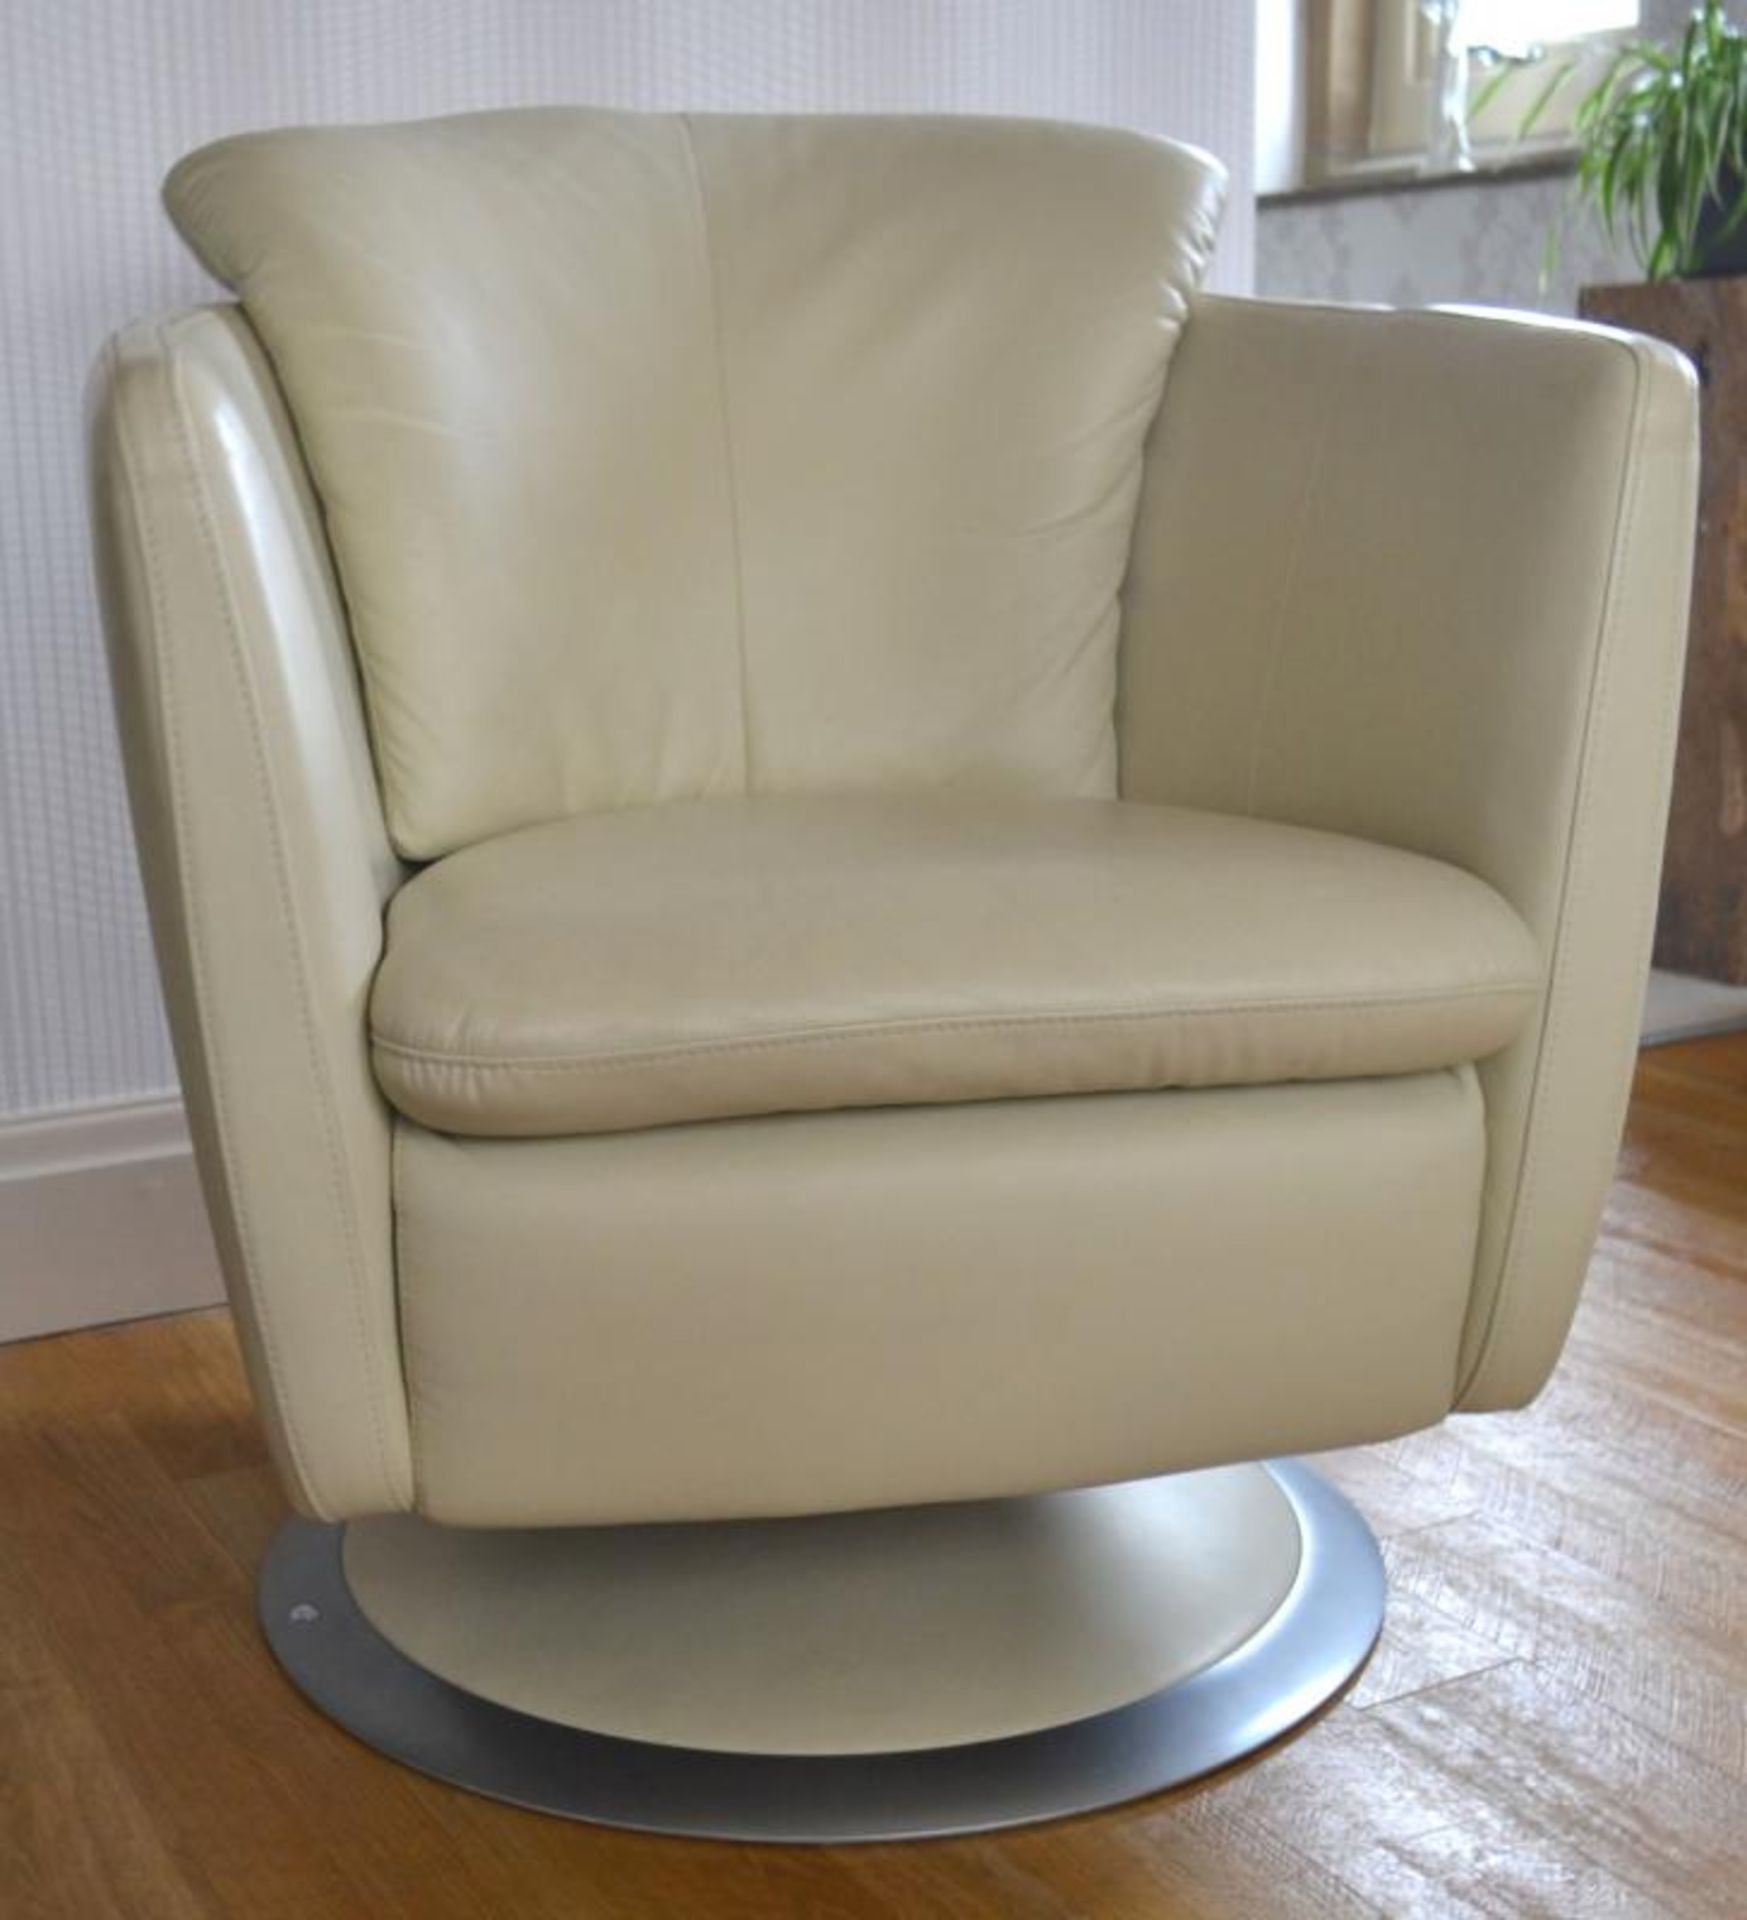 2 x Cream Leather Swivel Chairs - Excellent Condition - CL272 - Location: Burnley BB12 *NO VAT On Ha - Image 3 of 8